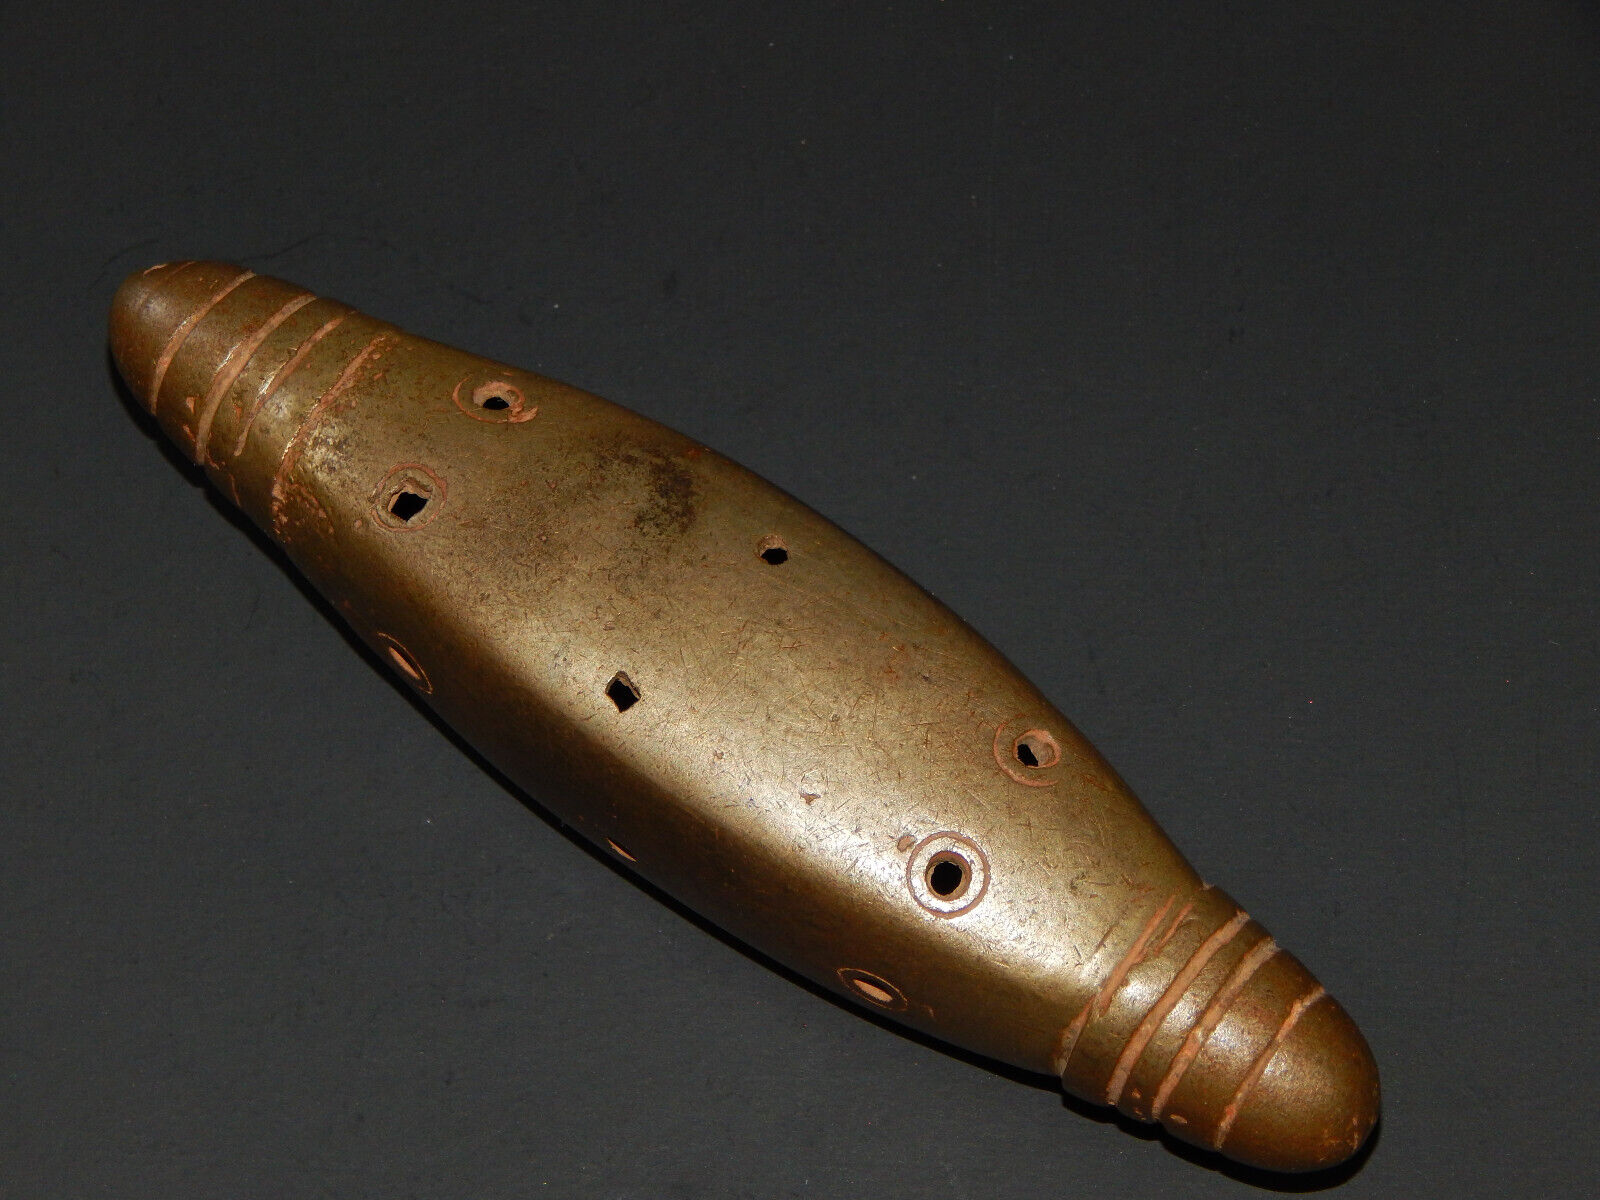 Rare antique Handcrafted Asian Brass Dice